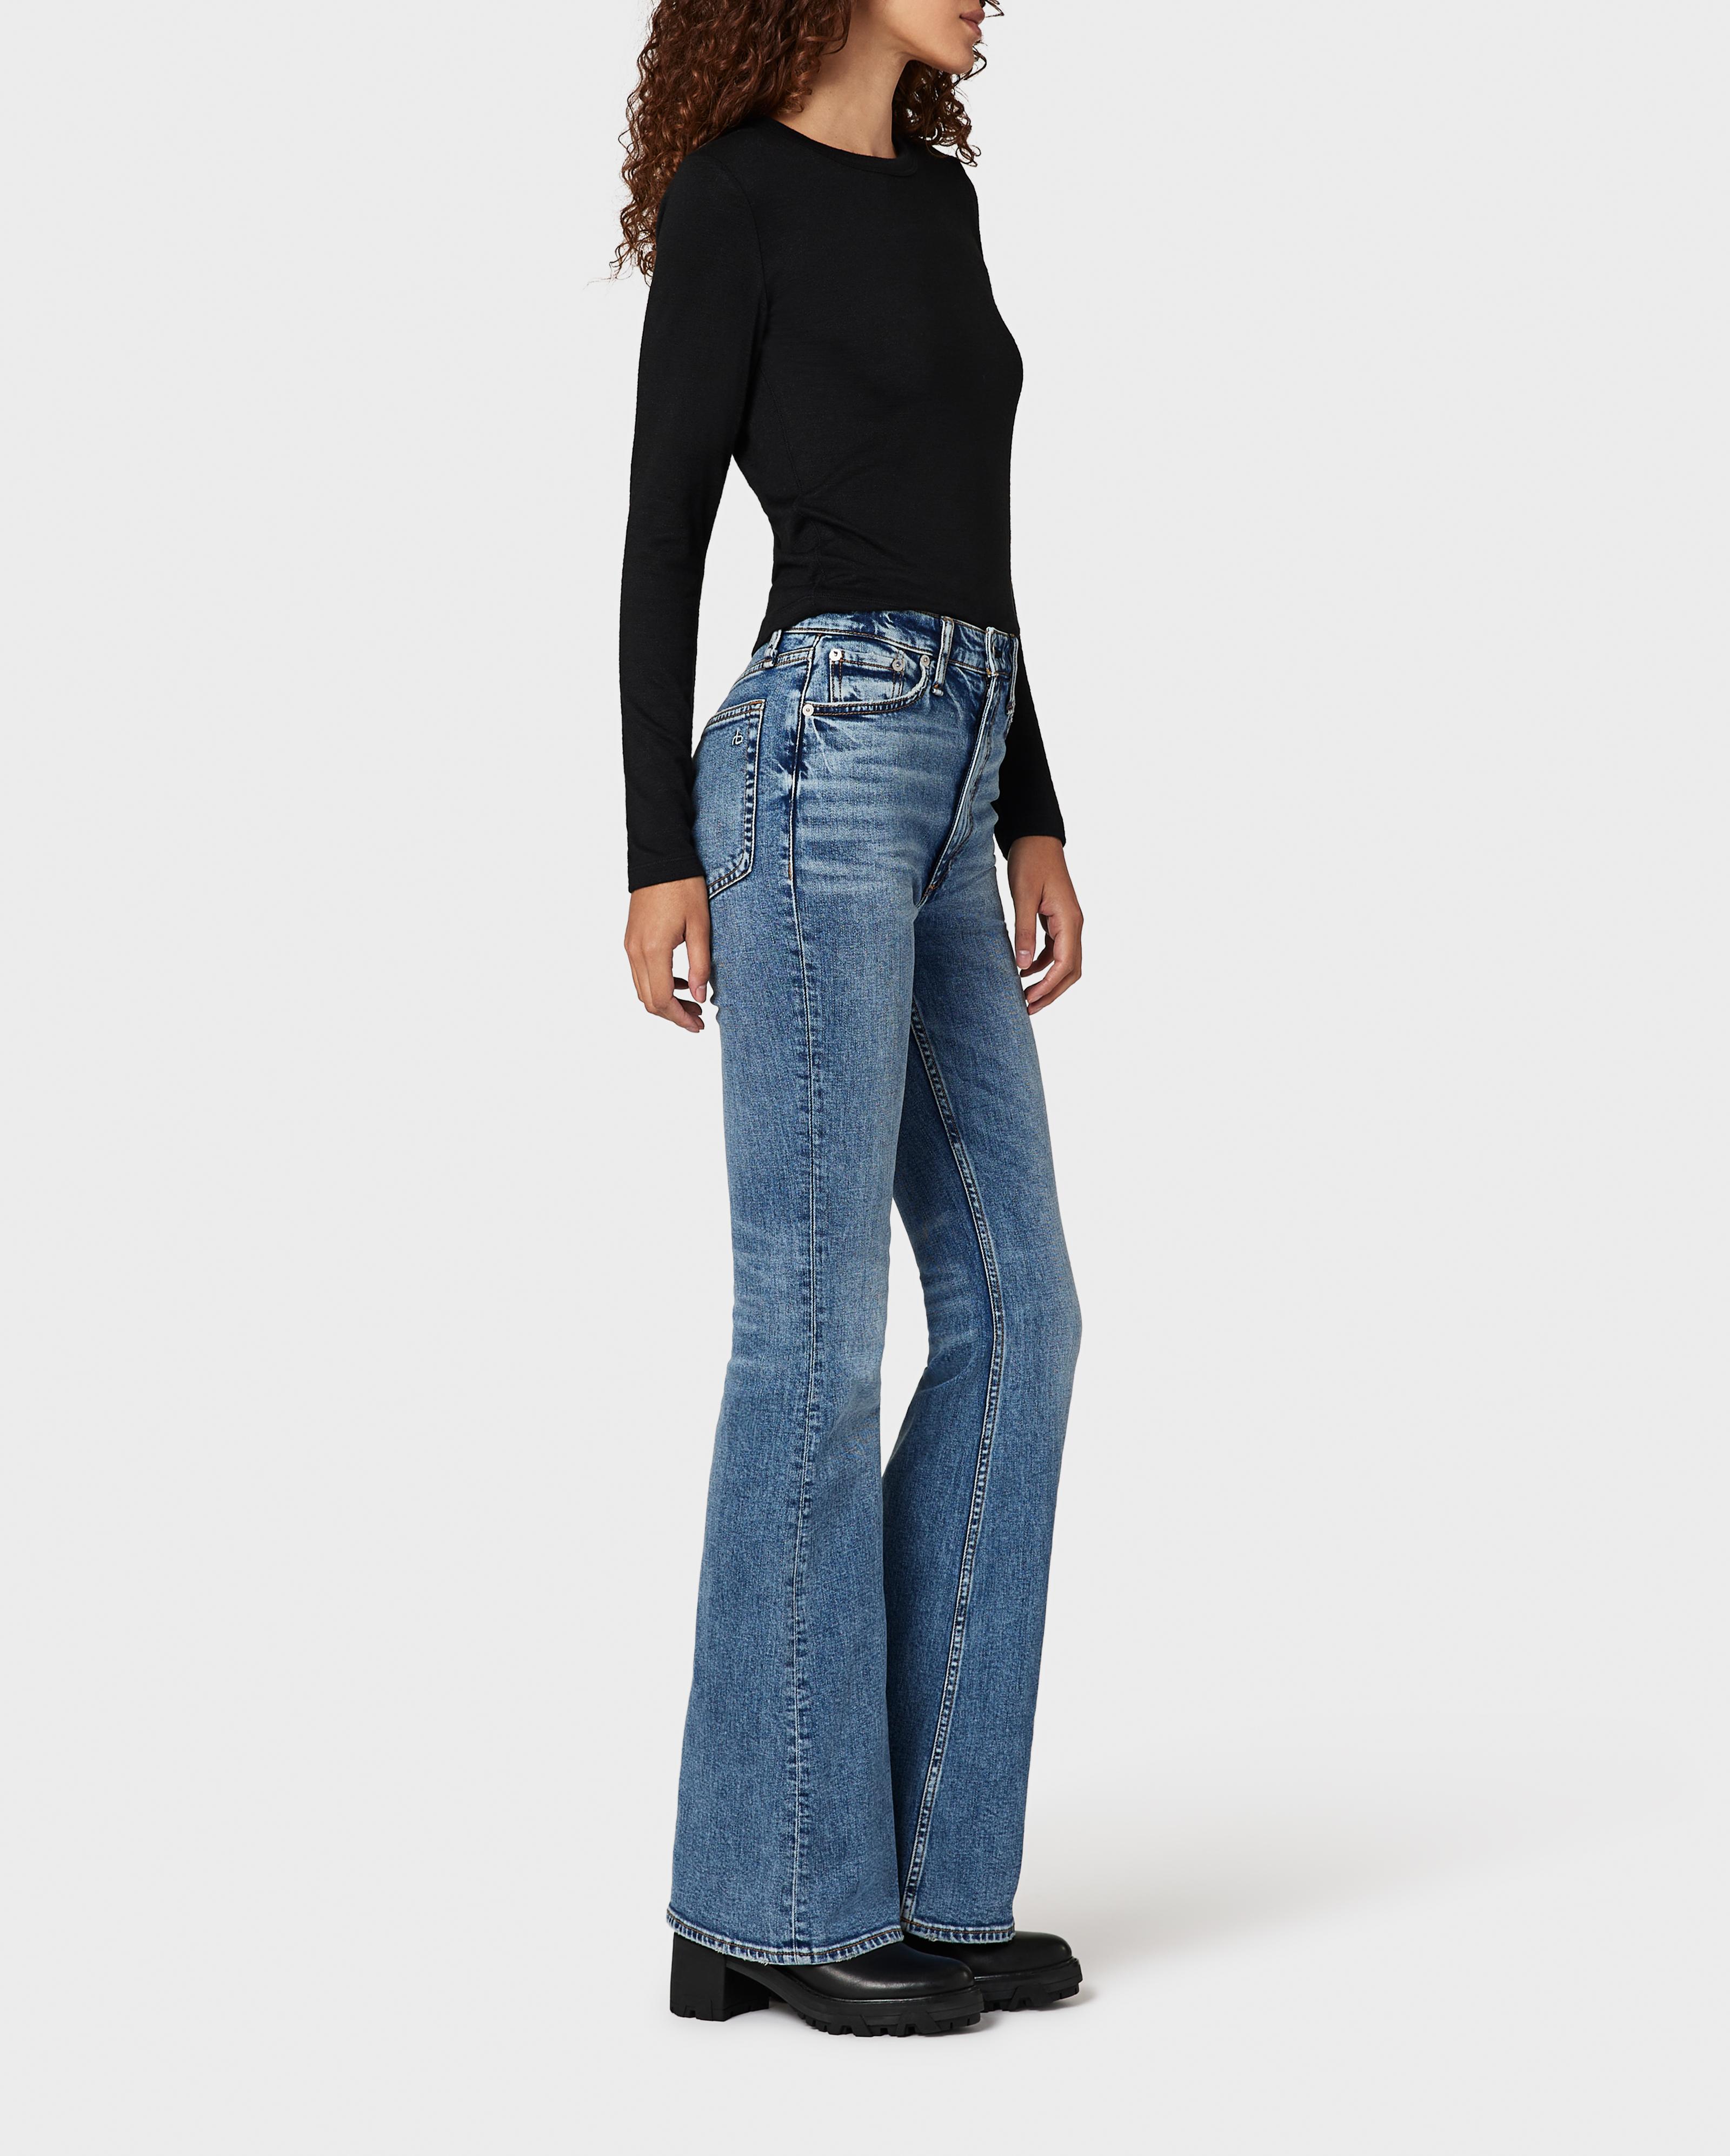 Rag & Bone Women's Clothing On Sale Up To 90% Off Retail